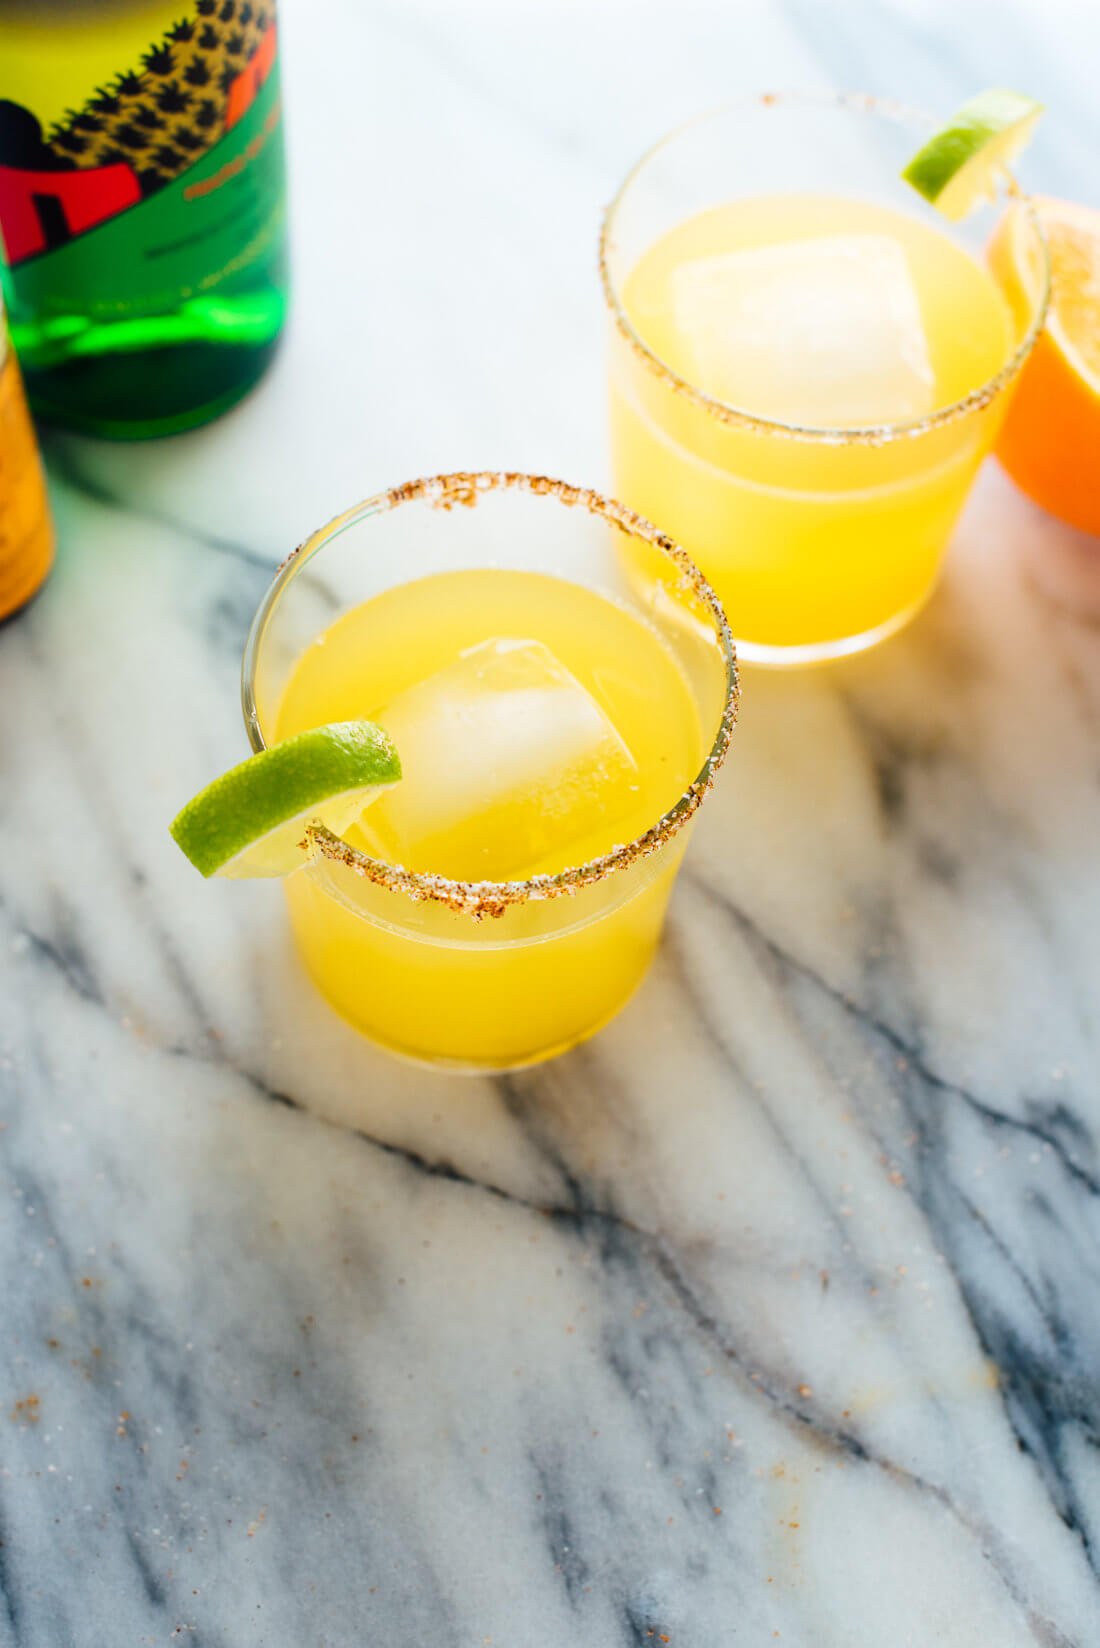 This mezcalita recipe is made with fresh orange juice, lime juice, and of course, mezcal! Get this #cocktail recipe at cookieandkate.com